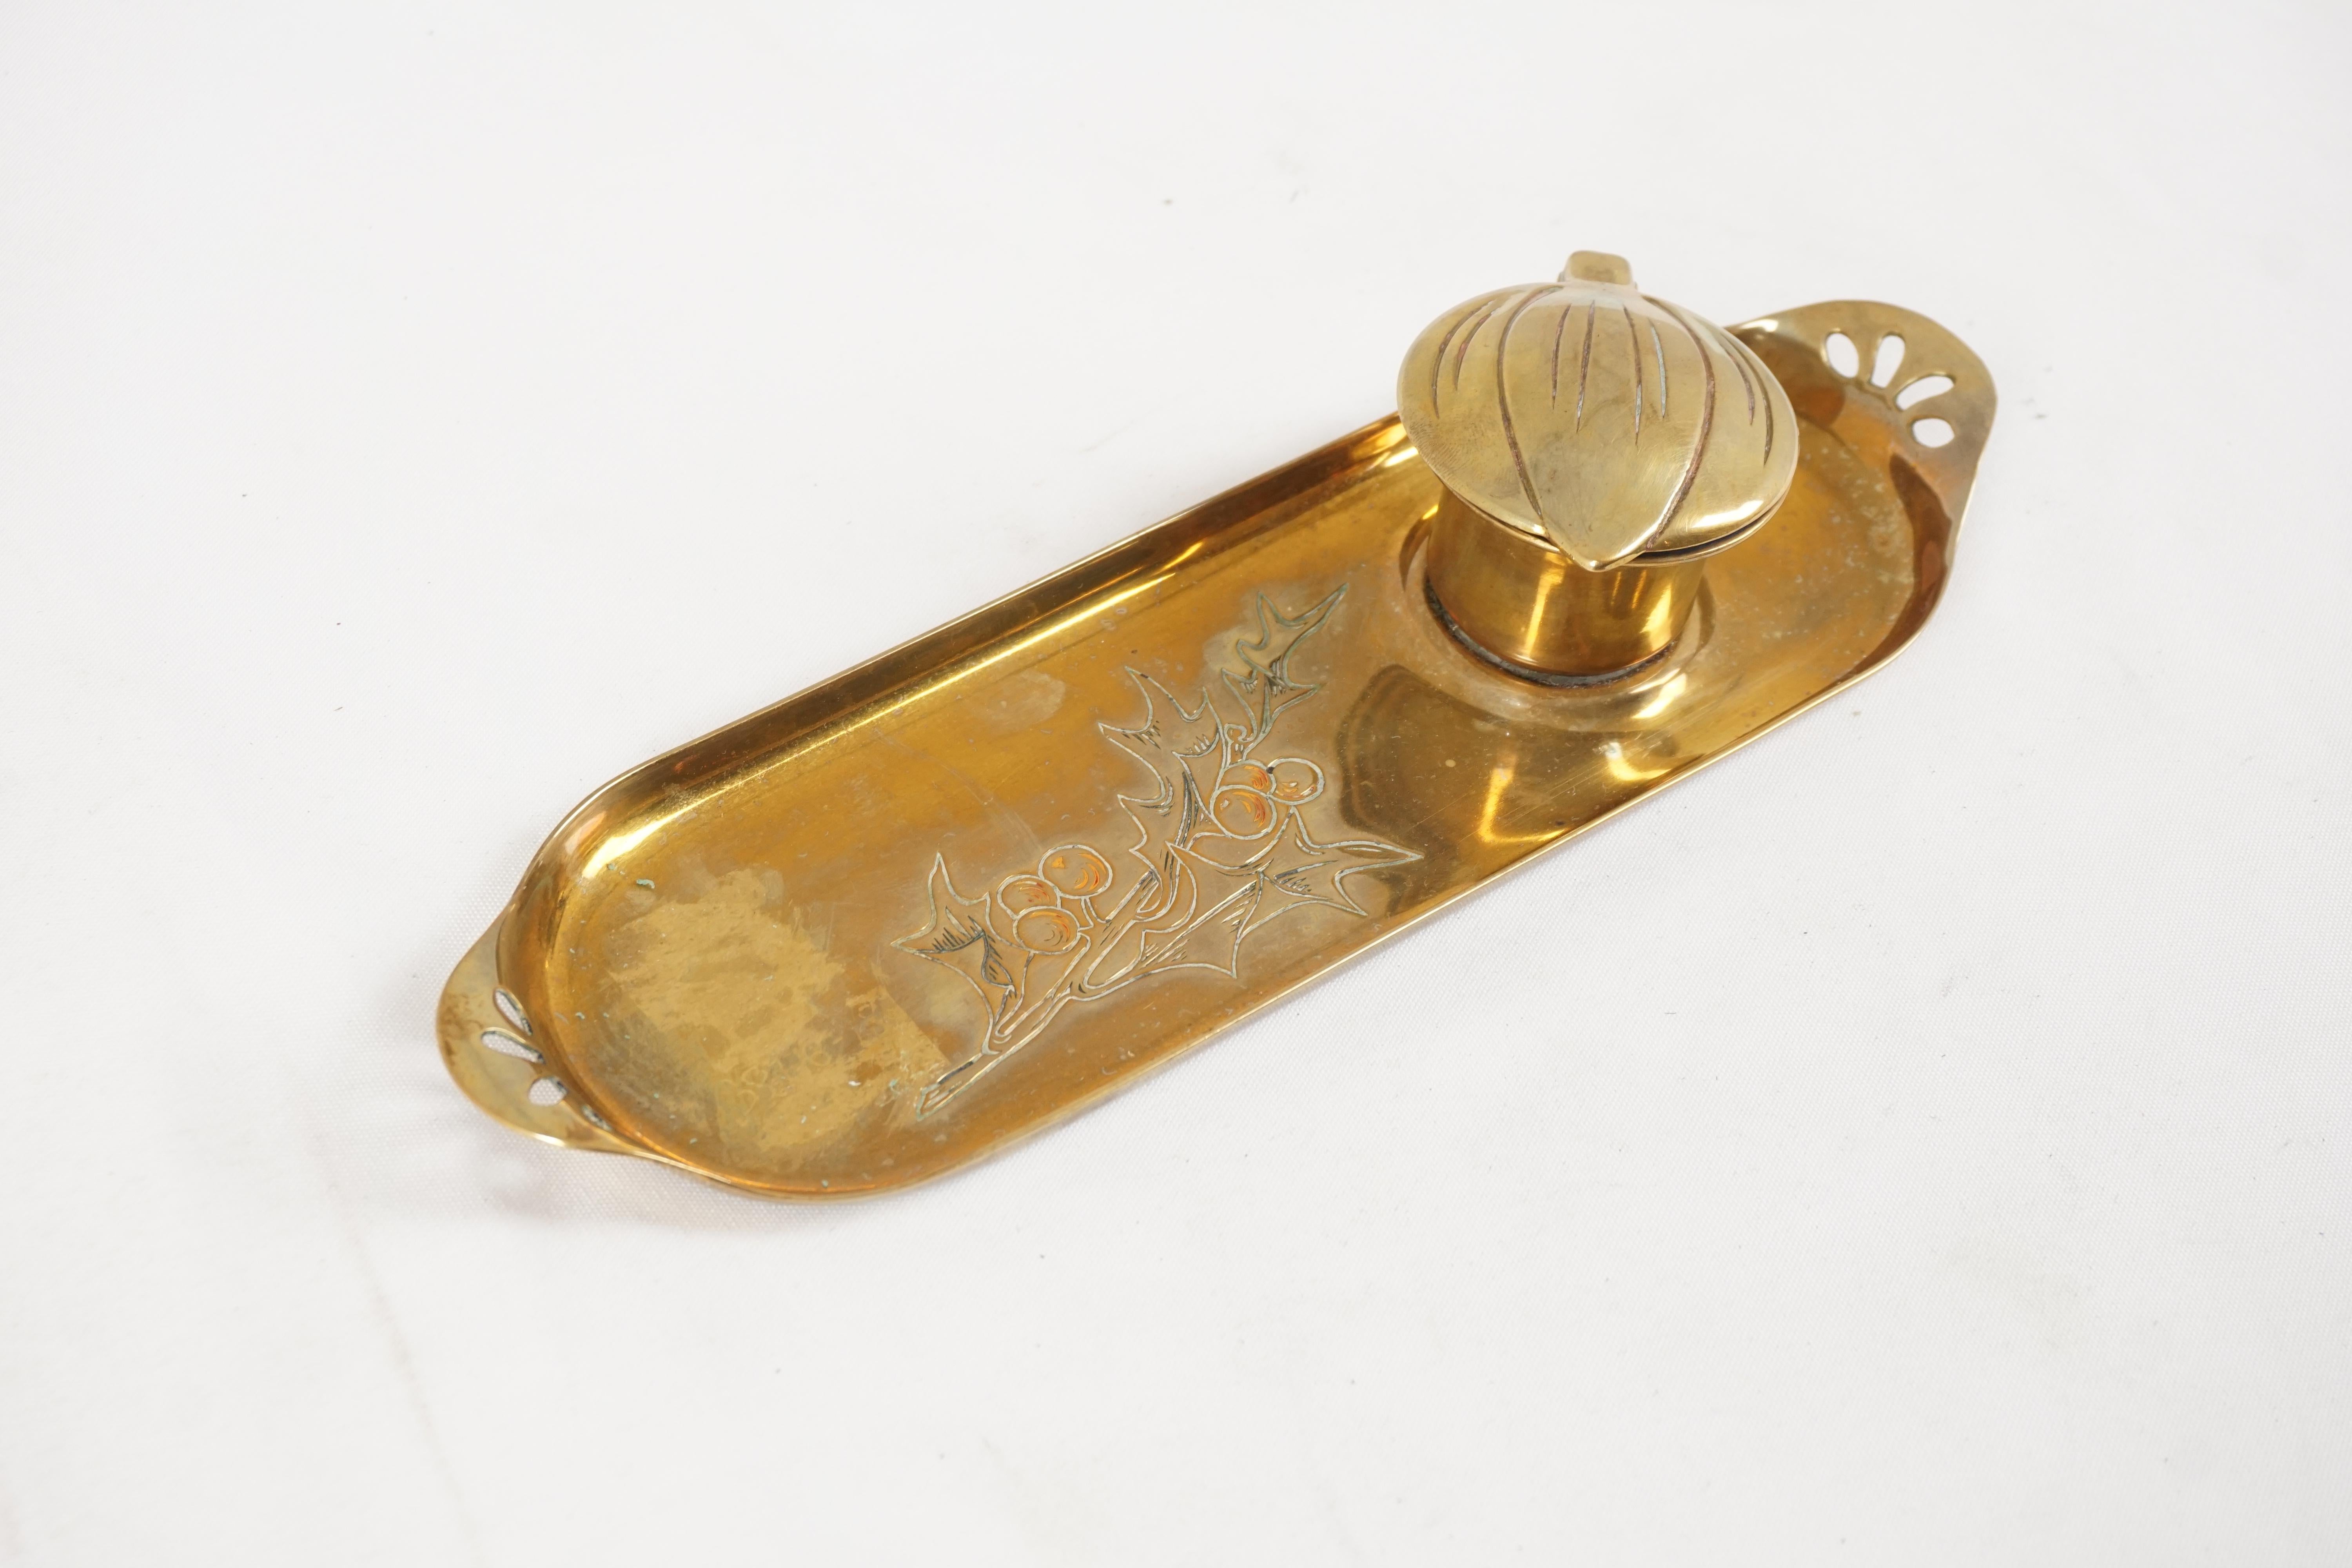 Antique brass inkstand, single inkwell, brass tray, Scotland 1920, B2780y

Scotland 1920
Brass Lid
Missing Liner 
Shaped Tray 
Decorated with a holly branch 

B2780Y

Measures: 9.5